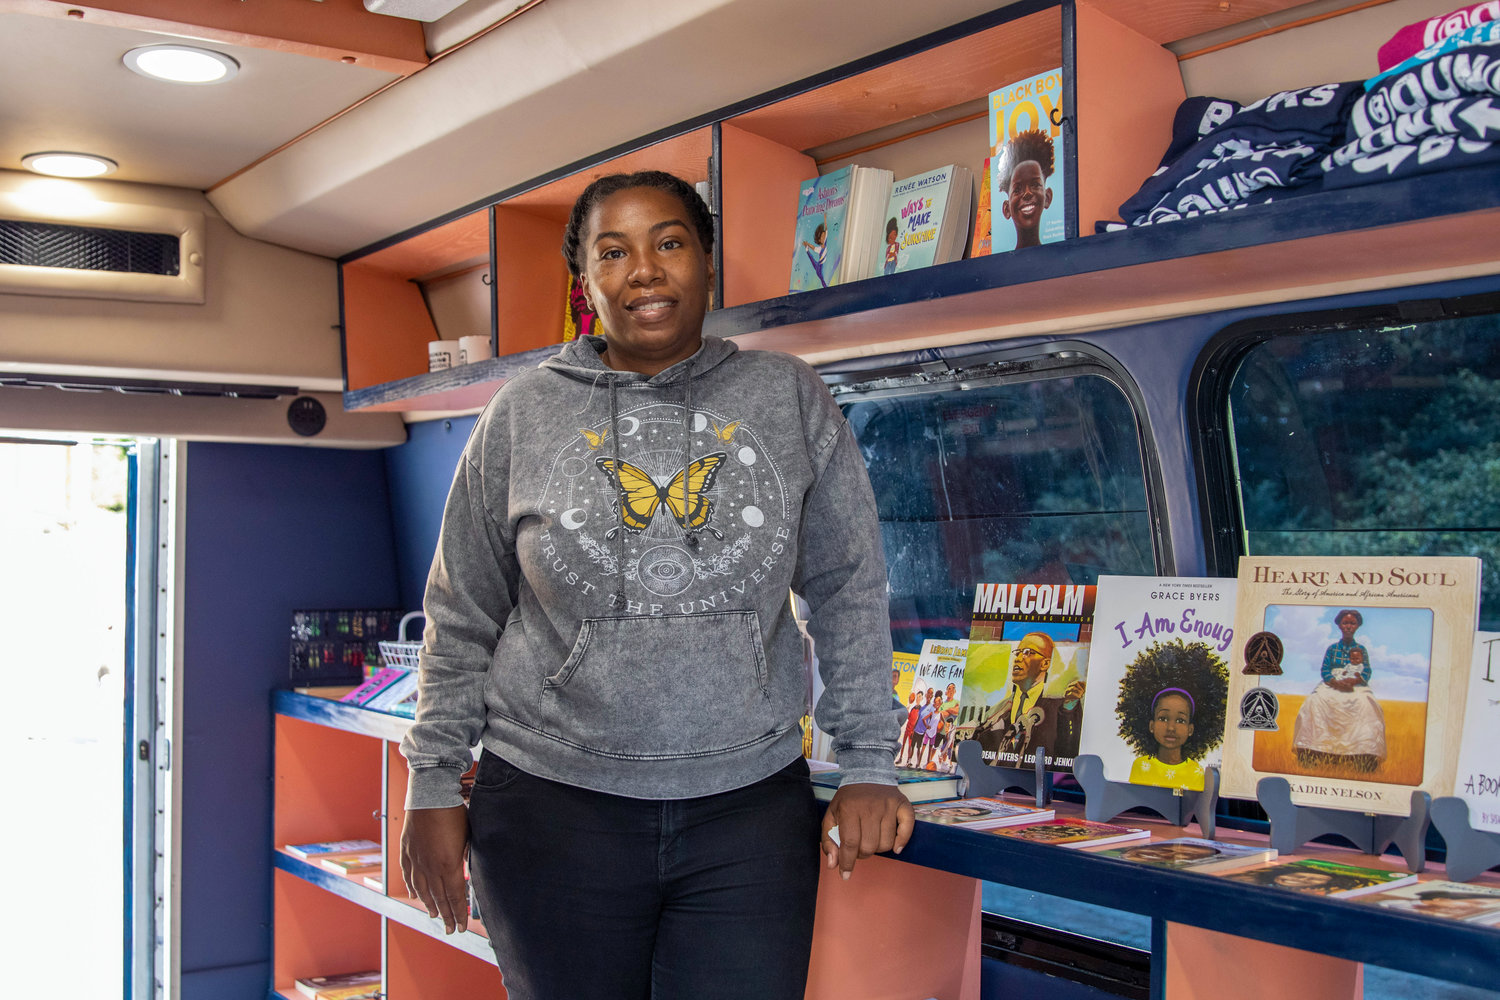 Bronx Bound Books founder Latanya DeVaughn says she likes to showcase authors of color on the shelves of her mobile bookstore. For her, it’s important to showcase authors who truly reflect the racial and cultural makeup of the Bronx.